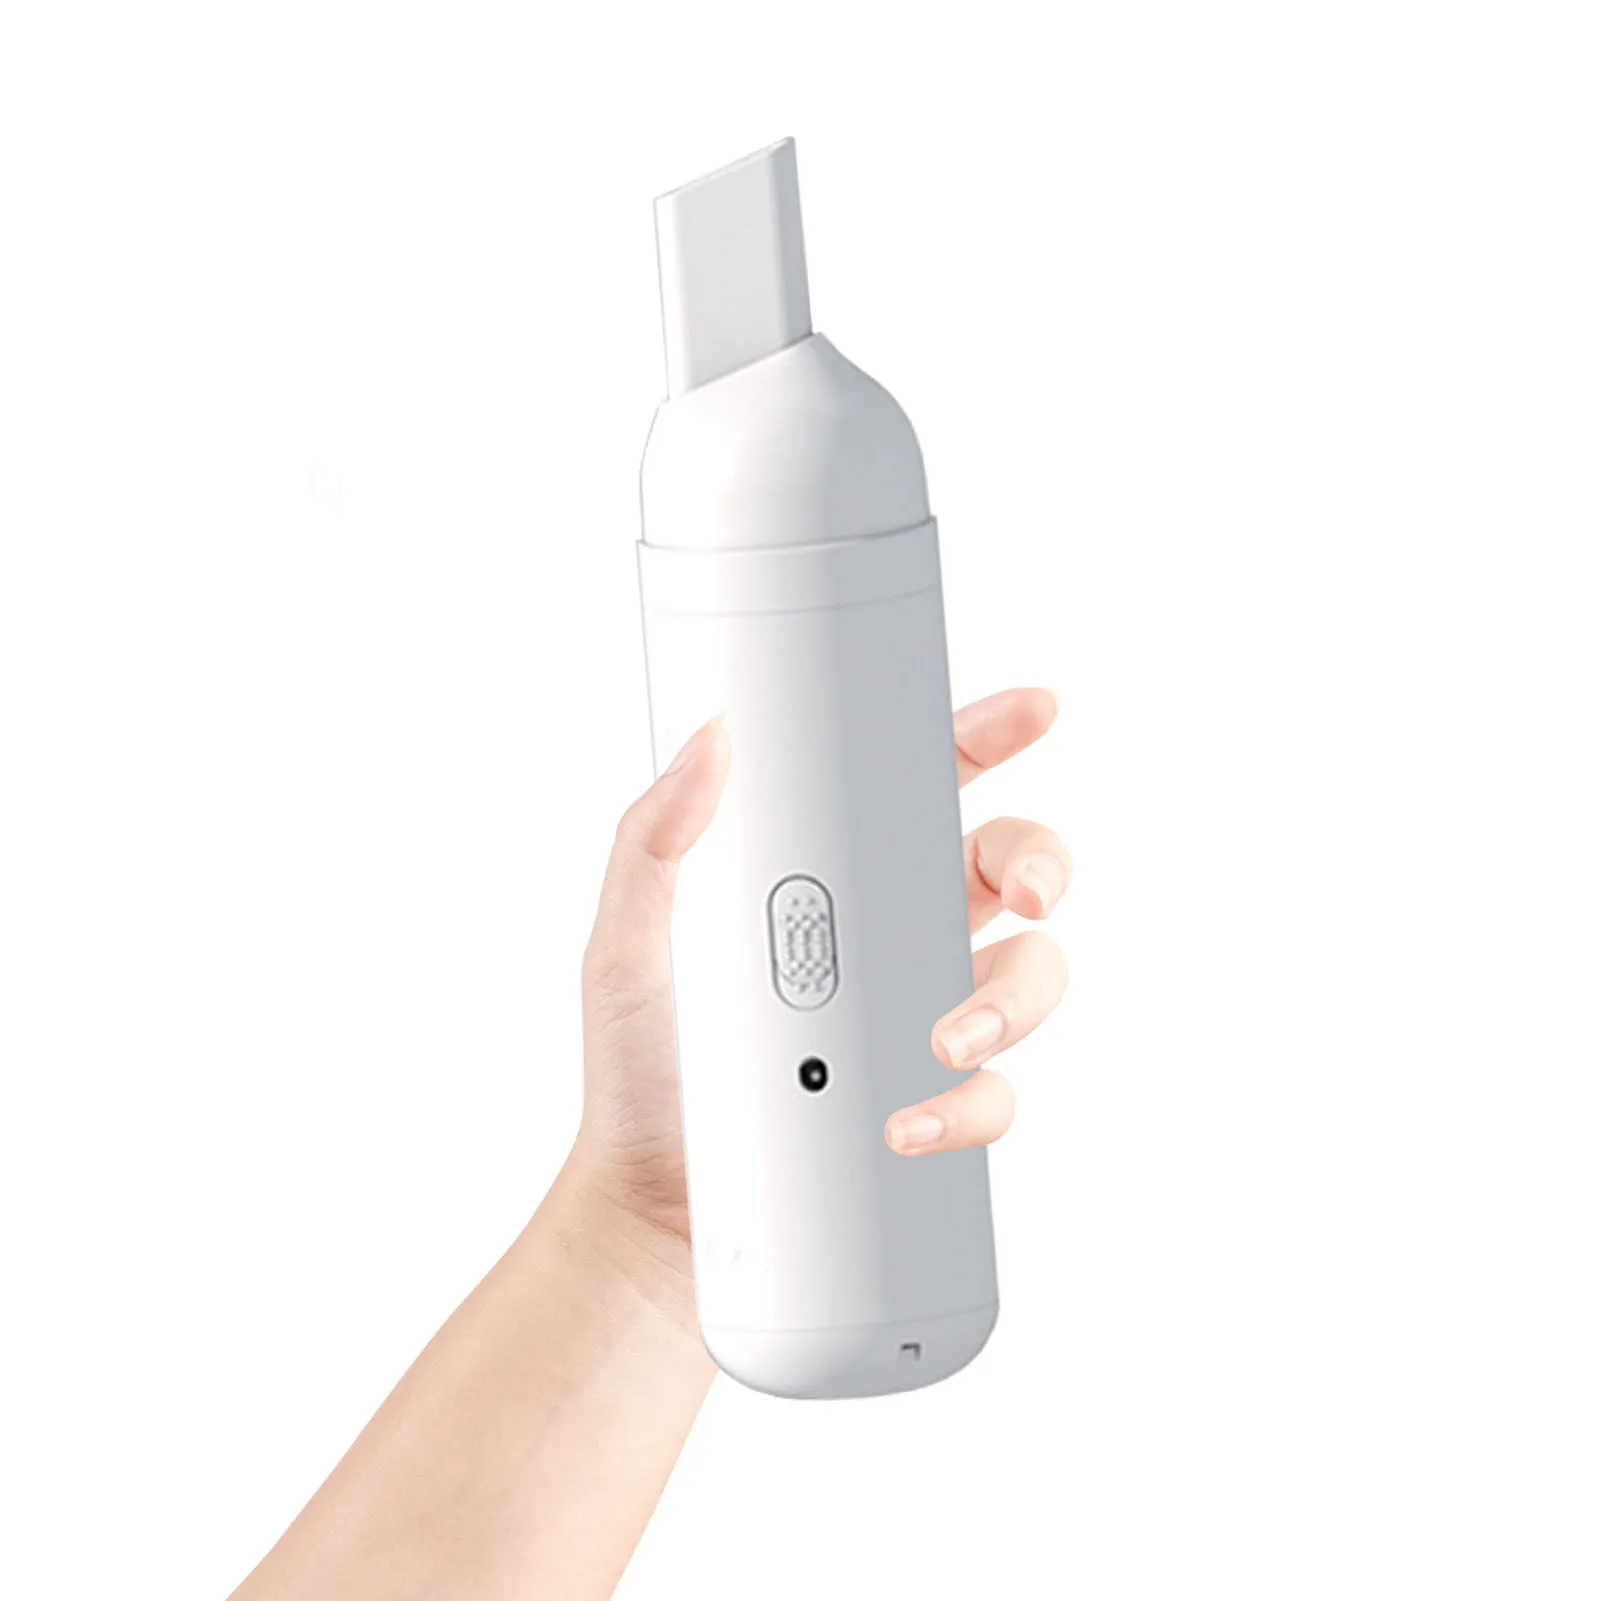 

Cordless Handheld Vacuum Cleaner Hand Held Air Duster Rechargeable Portable High Power Hand Vac Small Auto Accessories Kit For